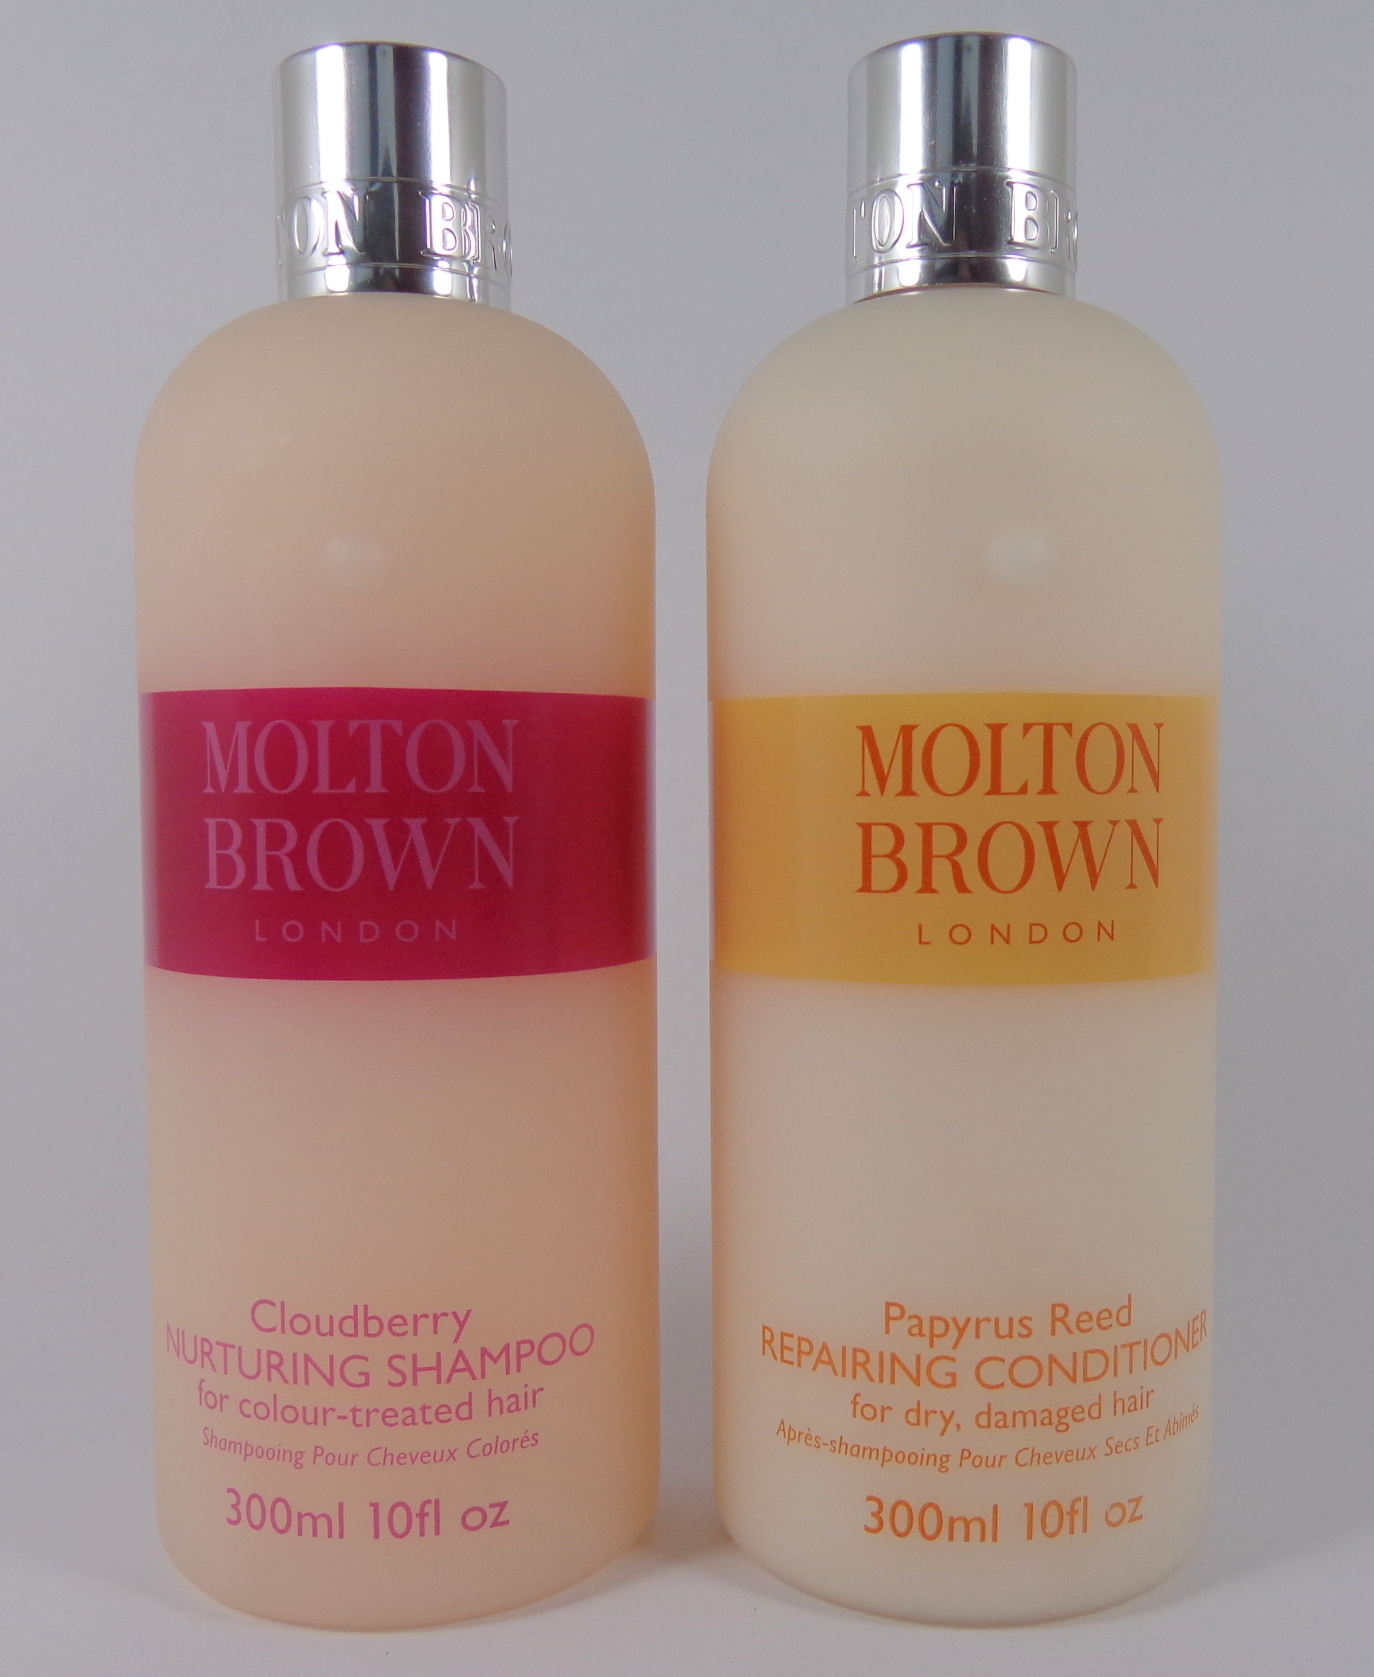 Review: Molton Brown Shampoo and Conditioner - My Highest Self